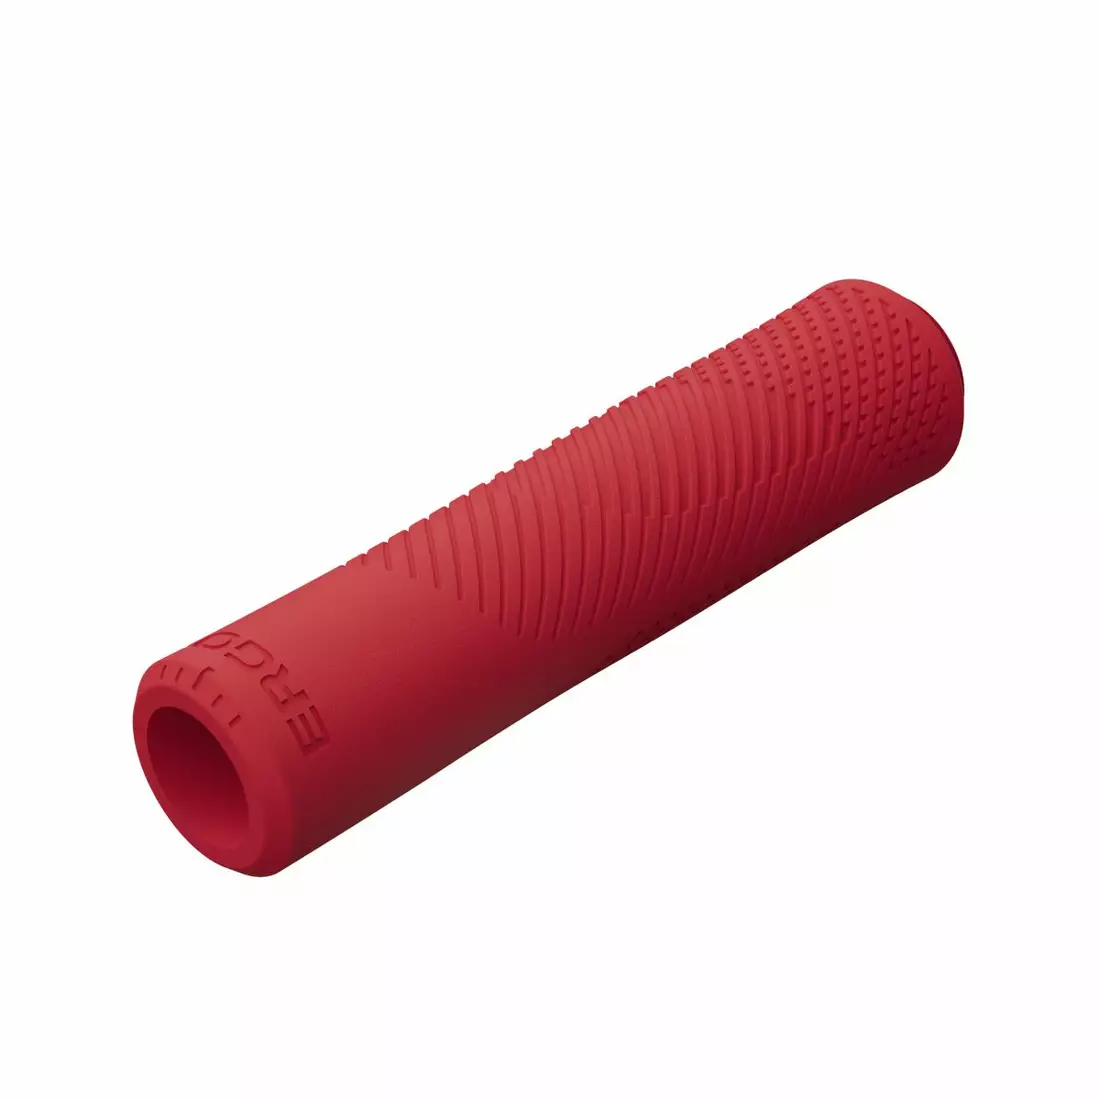 ERGON GXR S mtb bicycle grips, red